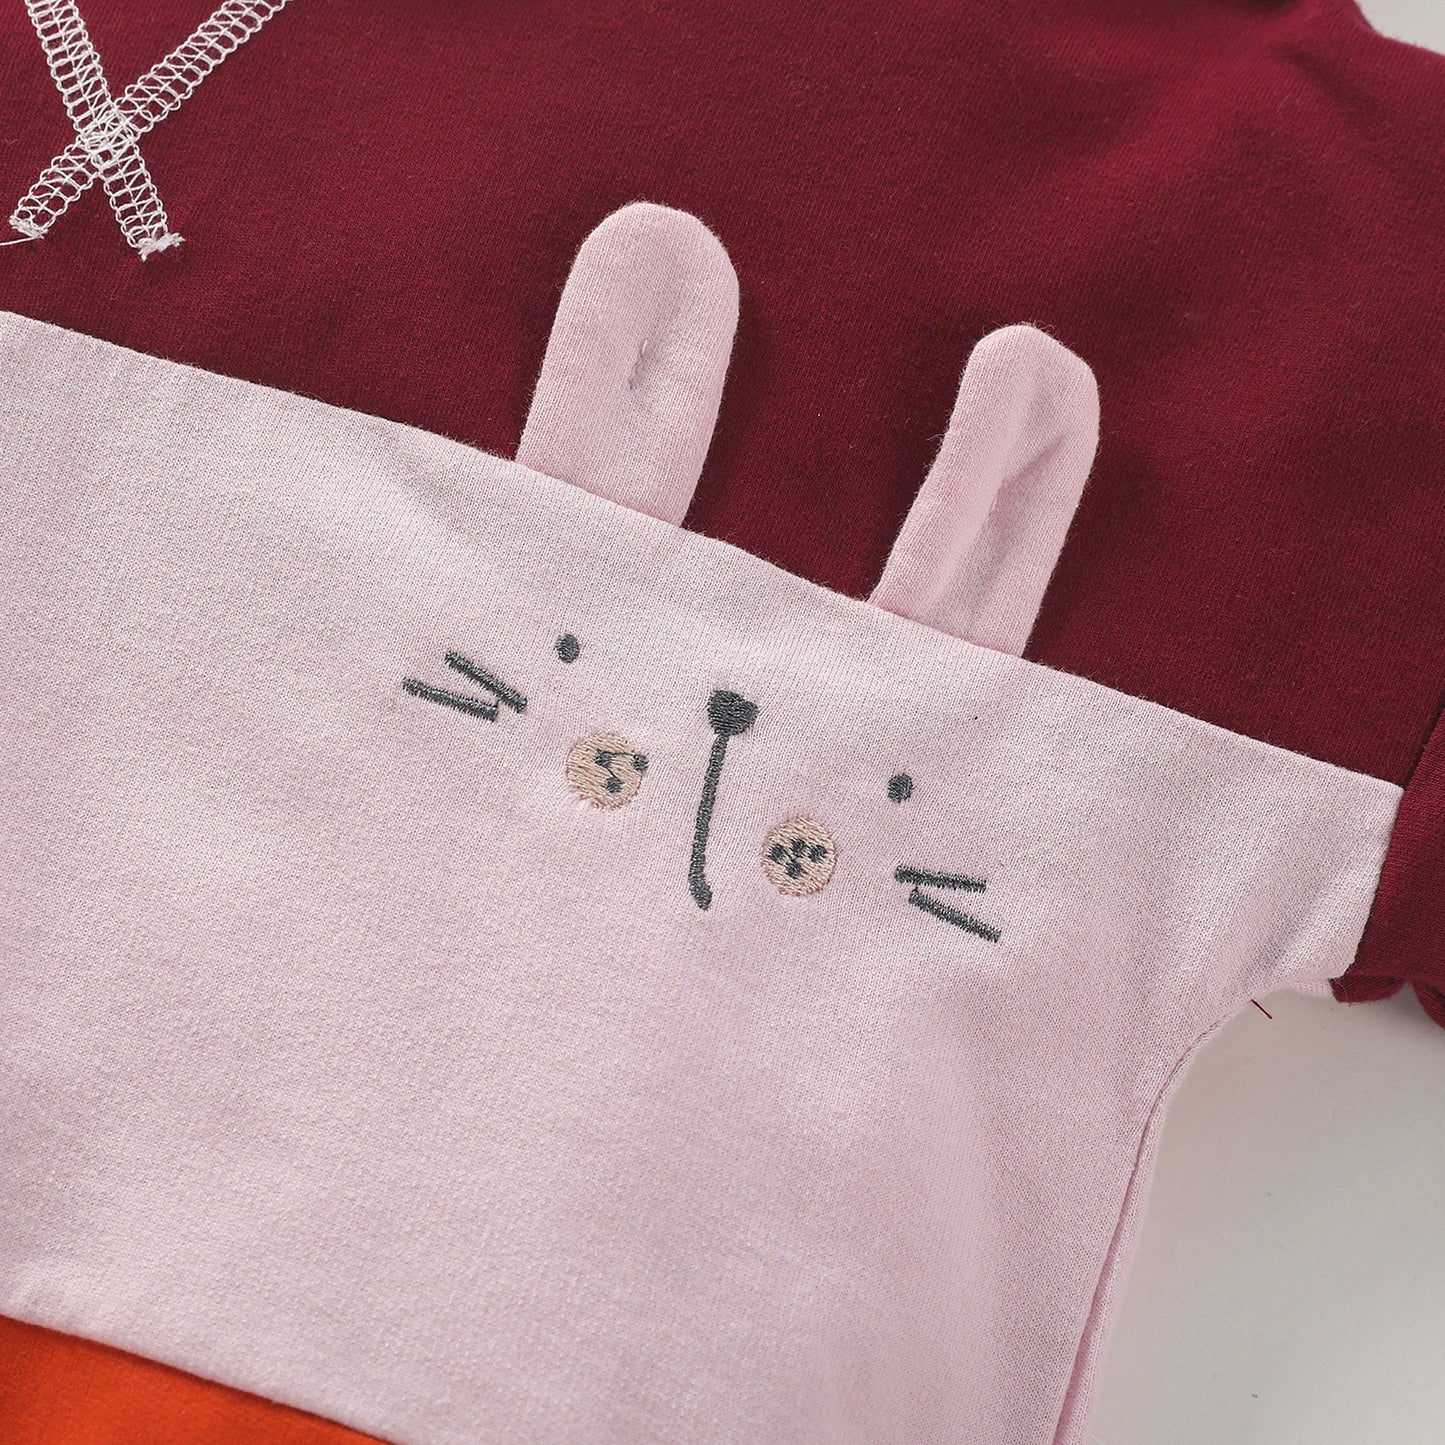 Baby Girl Rabbit Embroidered Graphic Colorblock Design Hoodie With Pant Sets My Kids-USA